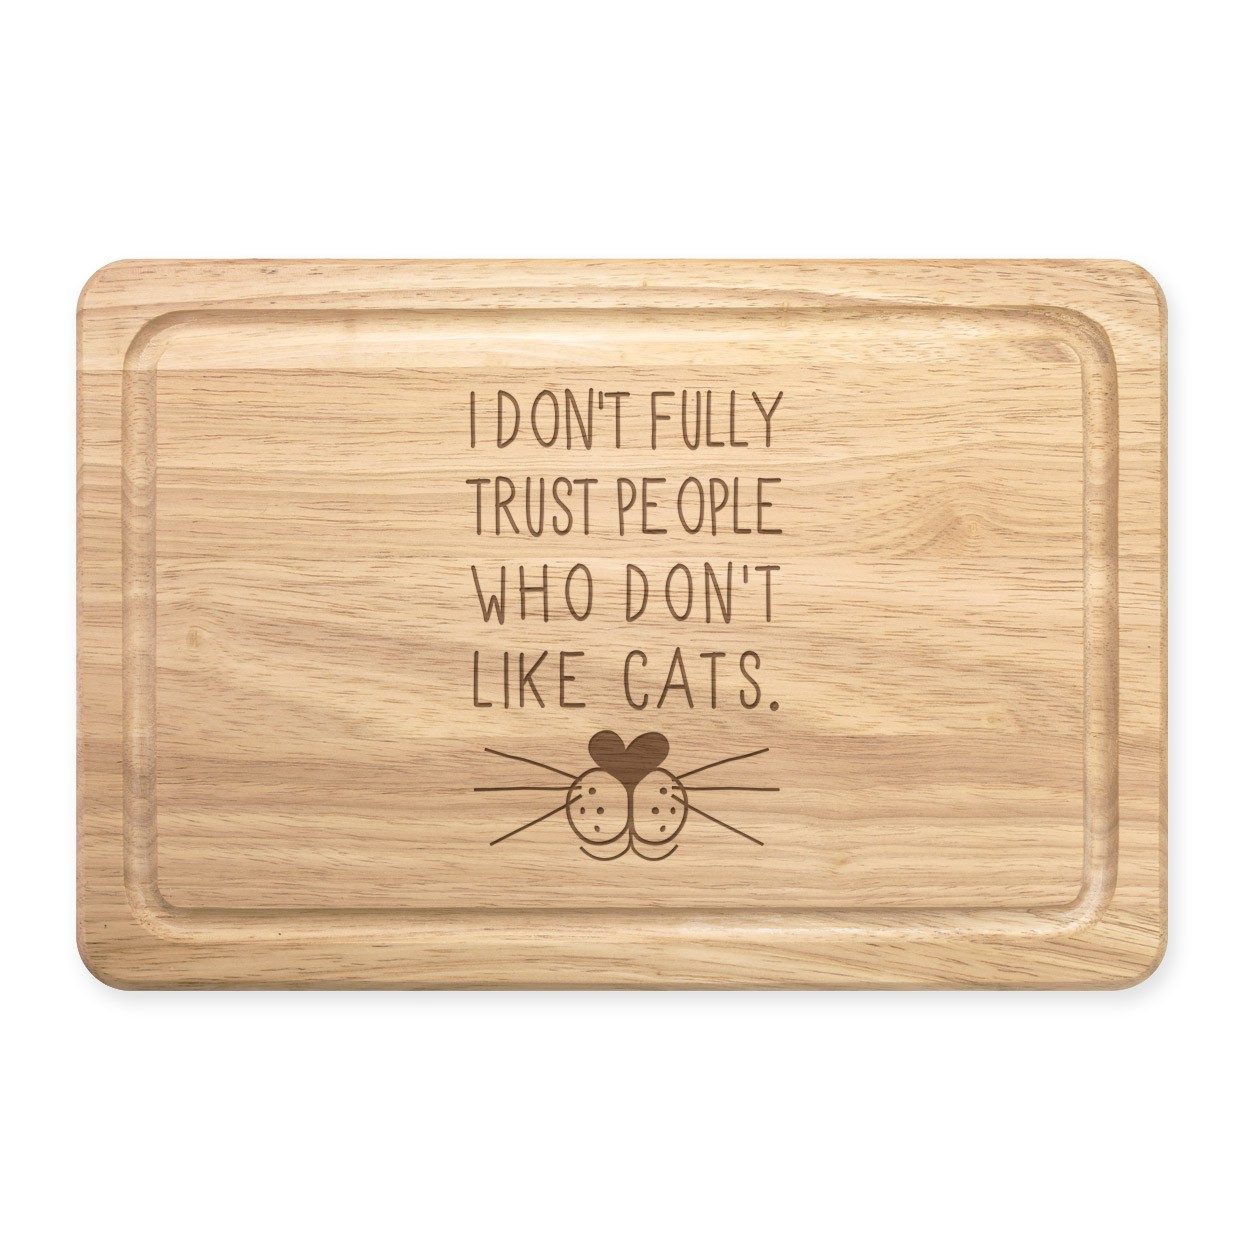 I Don't Fully Trust People Who Don't Like Cats Rectangular Wooden Chopping Board